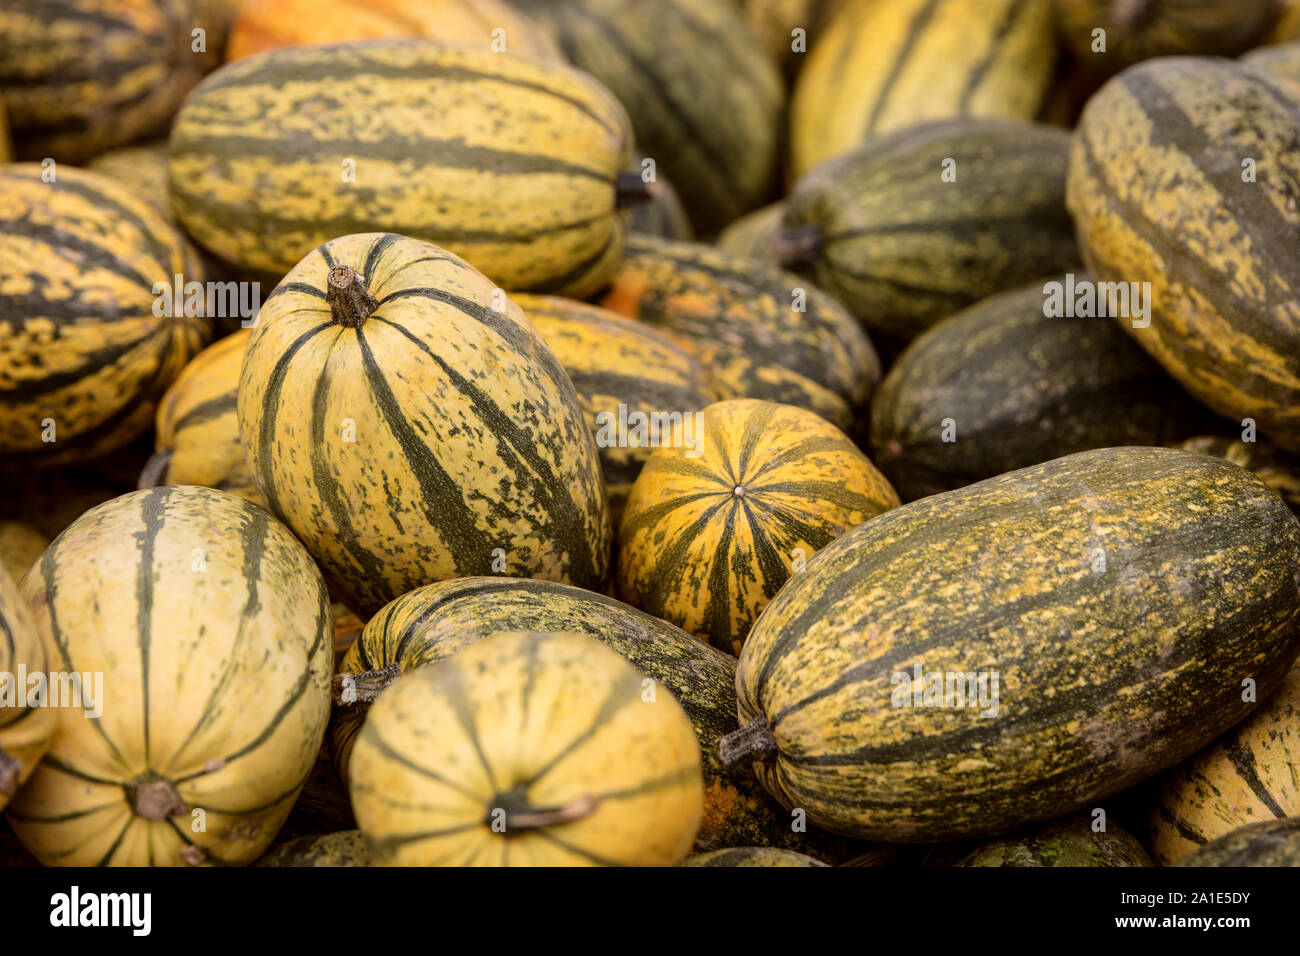 Cucurbita Pepo, lots of vegetable squash als background, yellow and green Stock Photo